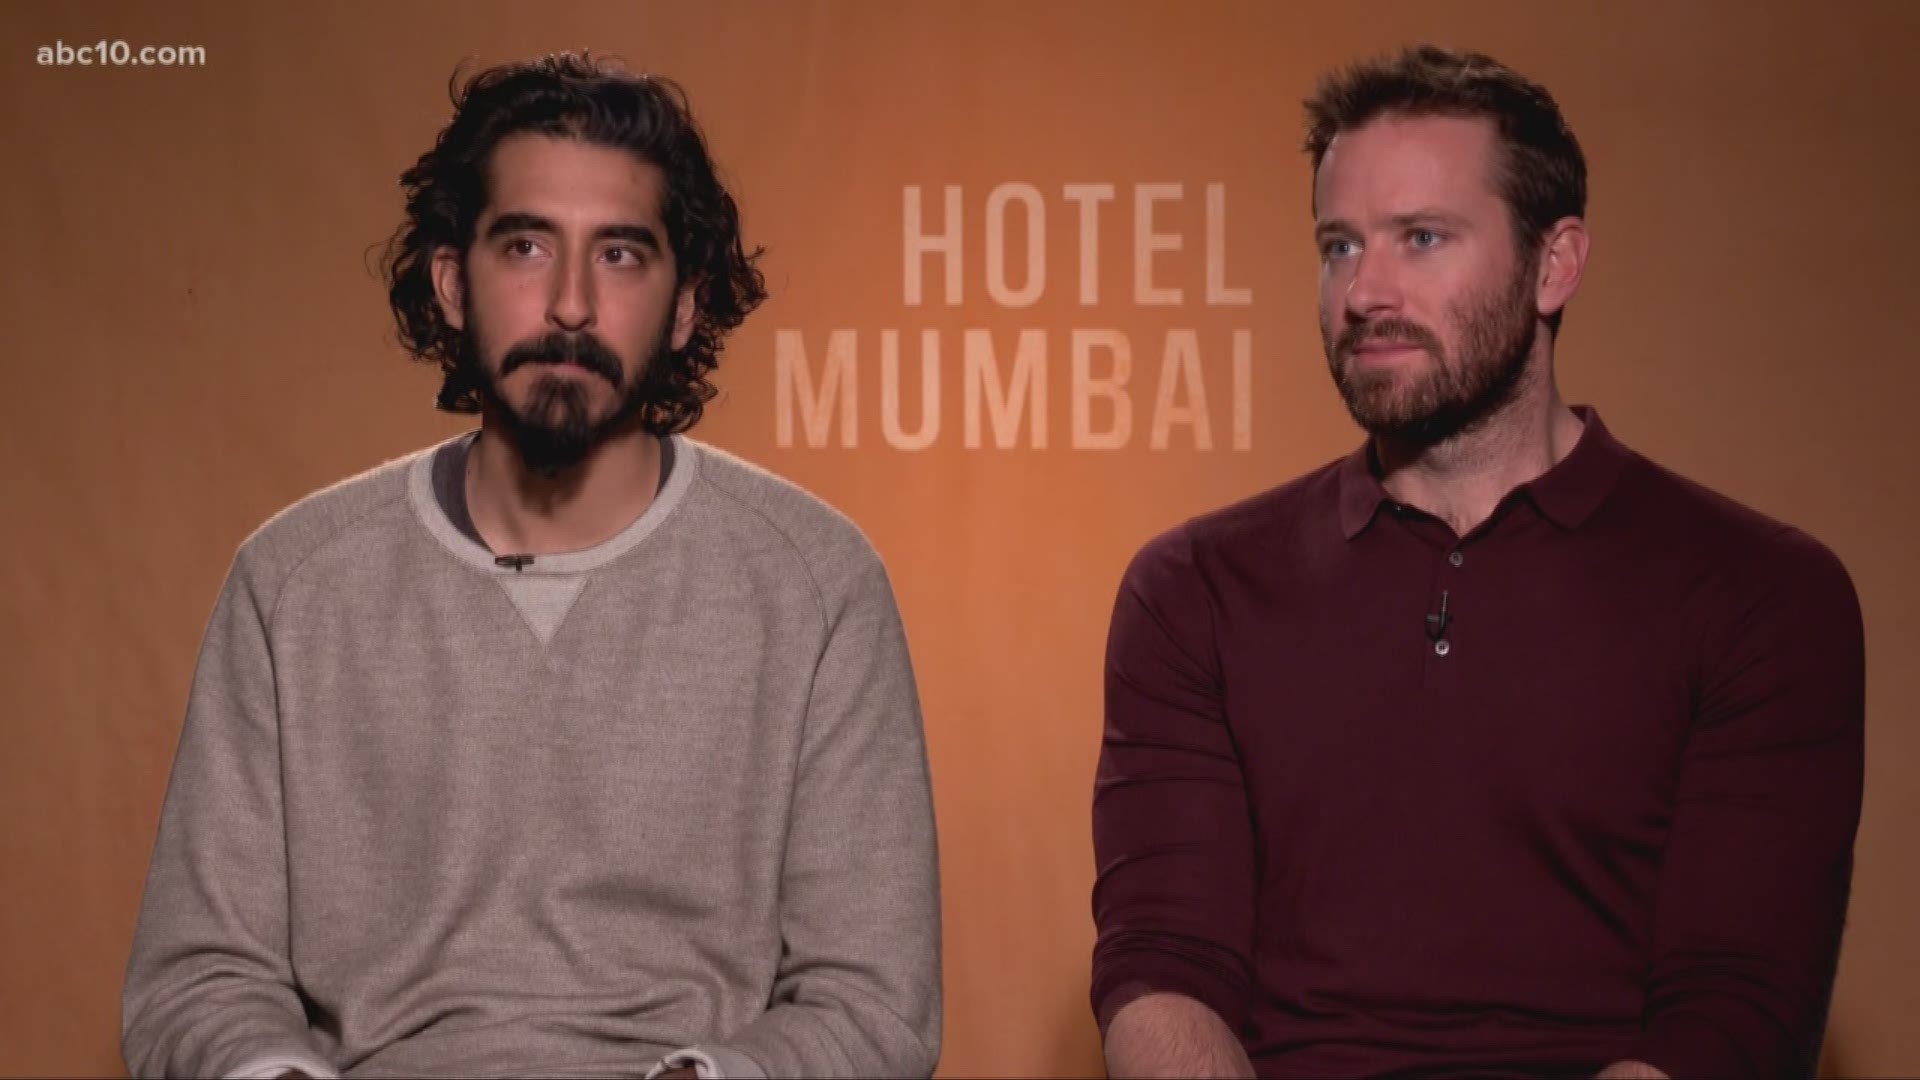 Mark S. Allen sat down with Dev Patel and Armie Hammer to talk about their new movie "Hotel Mumbai."